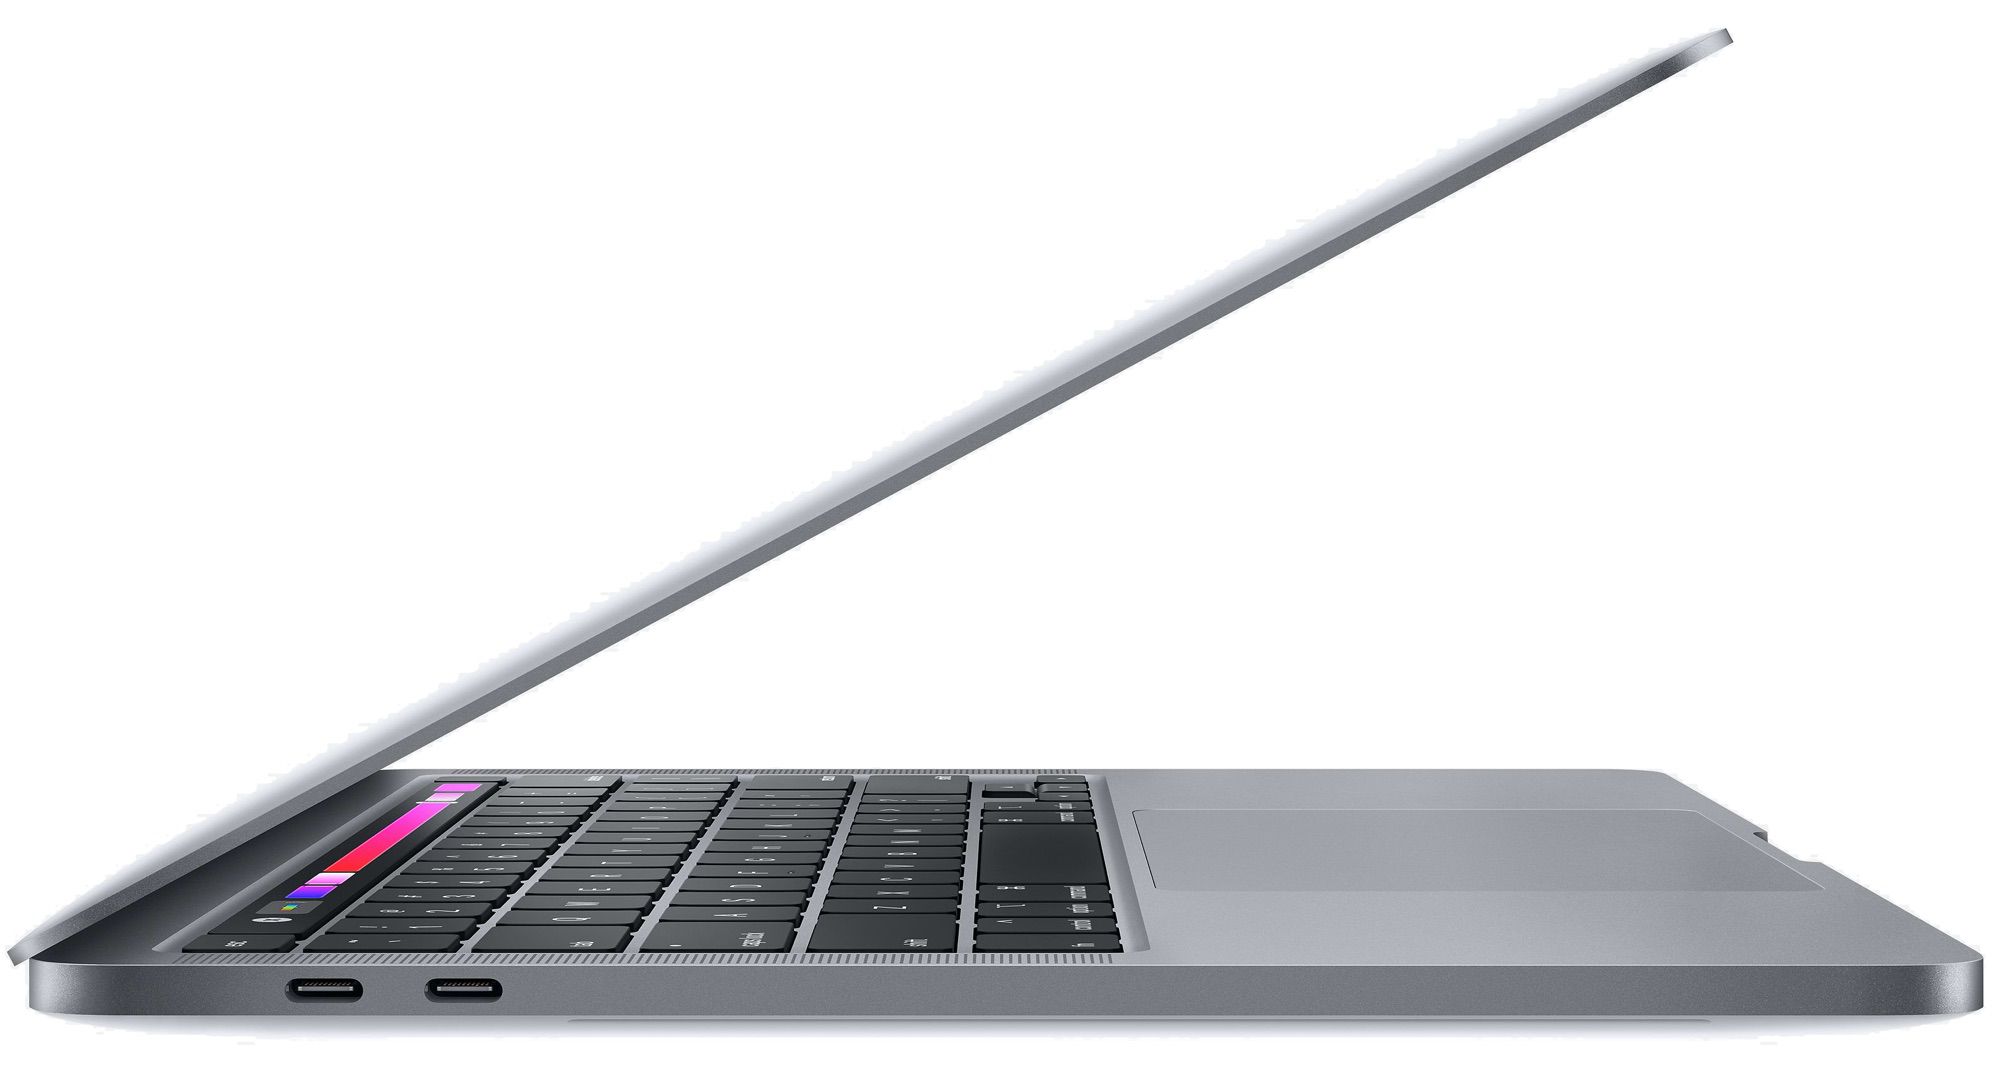 New Sealed MacBook Pro 13 inch With Touch Bar, M1 CPU Processor 